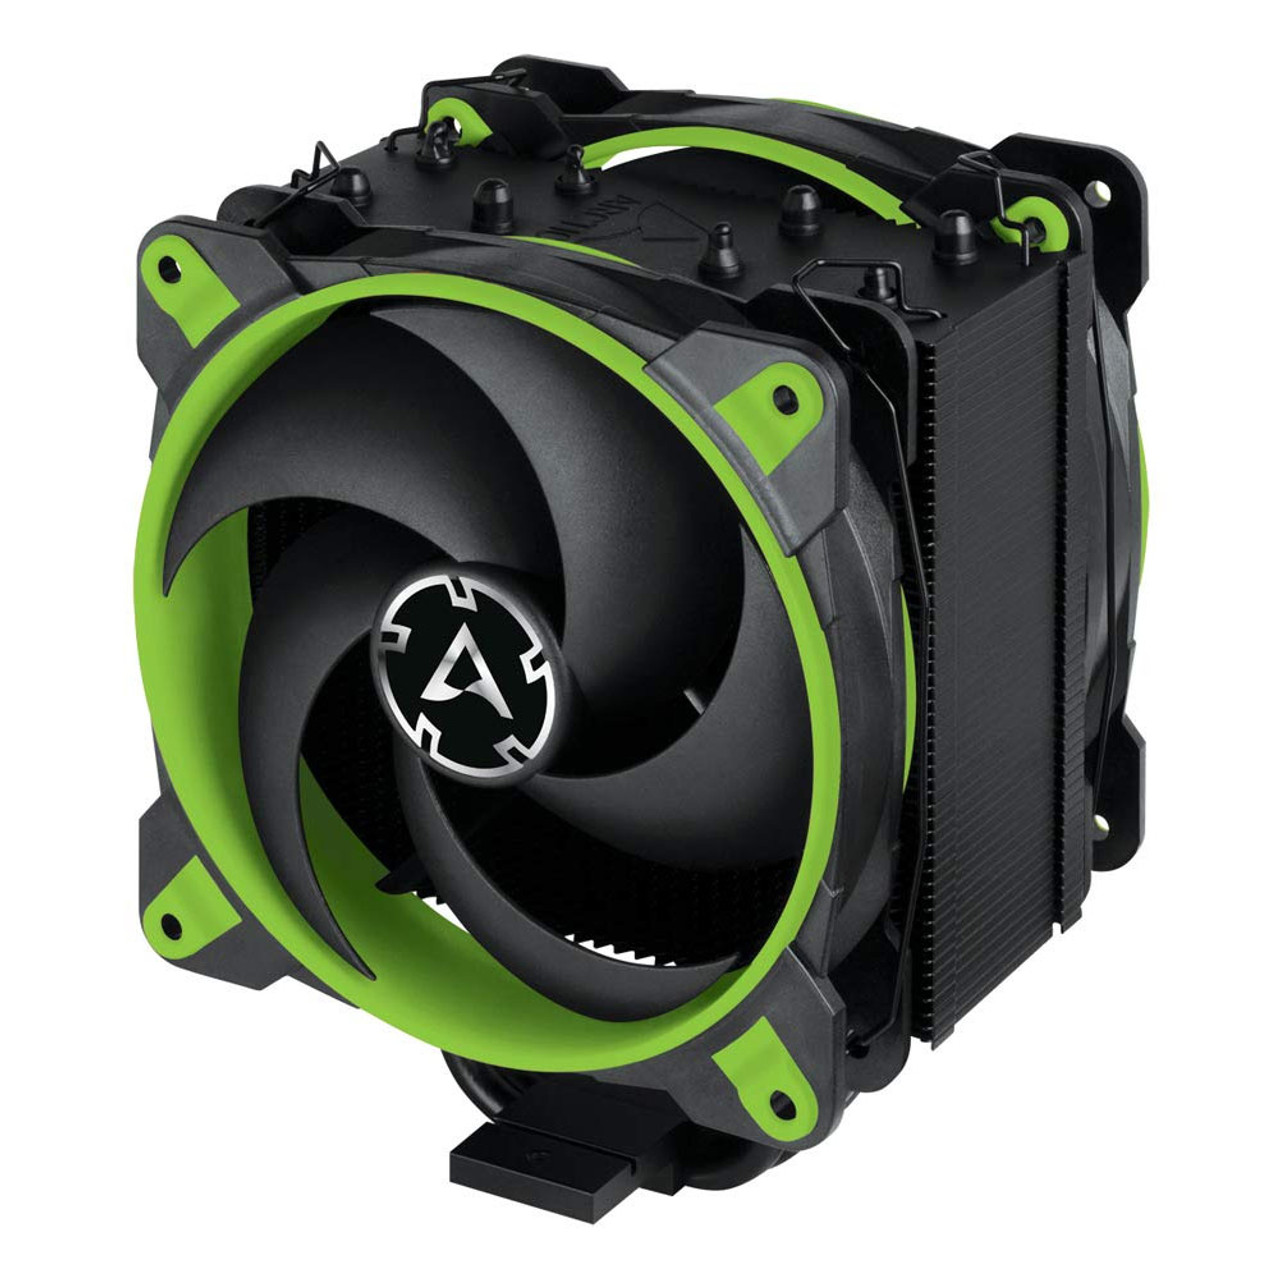 Arctic ACFRE00063A Freezer 34 eSports DUO Edition 120mm Tower CPU Cooler Fans Green